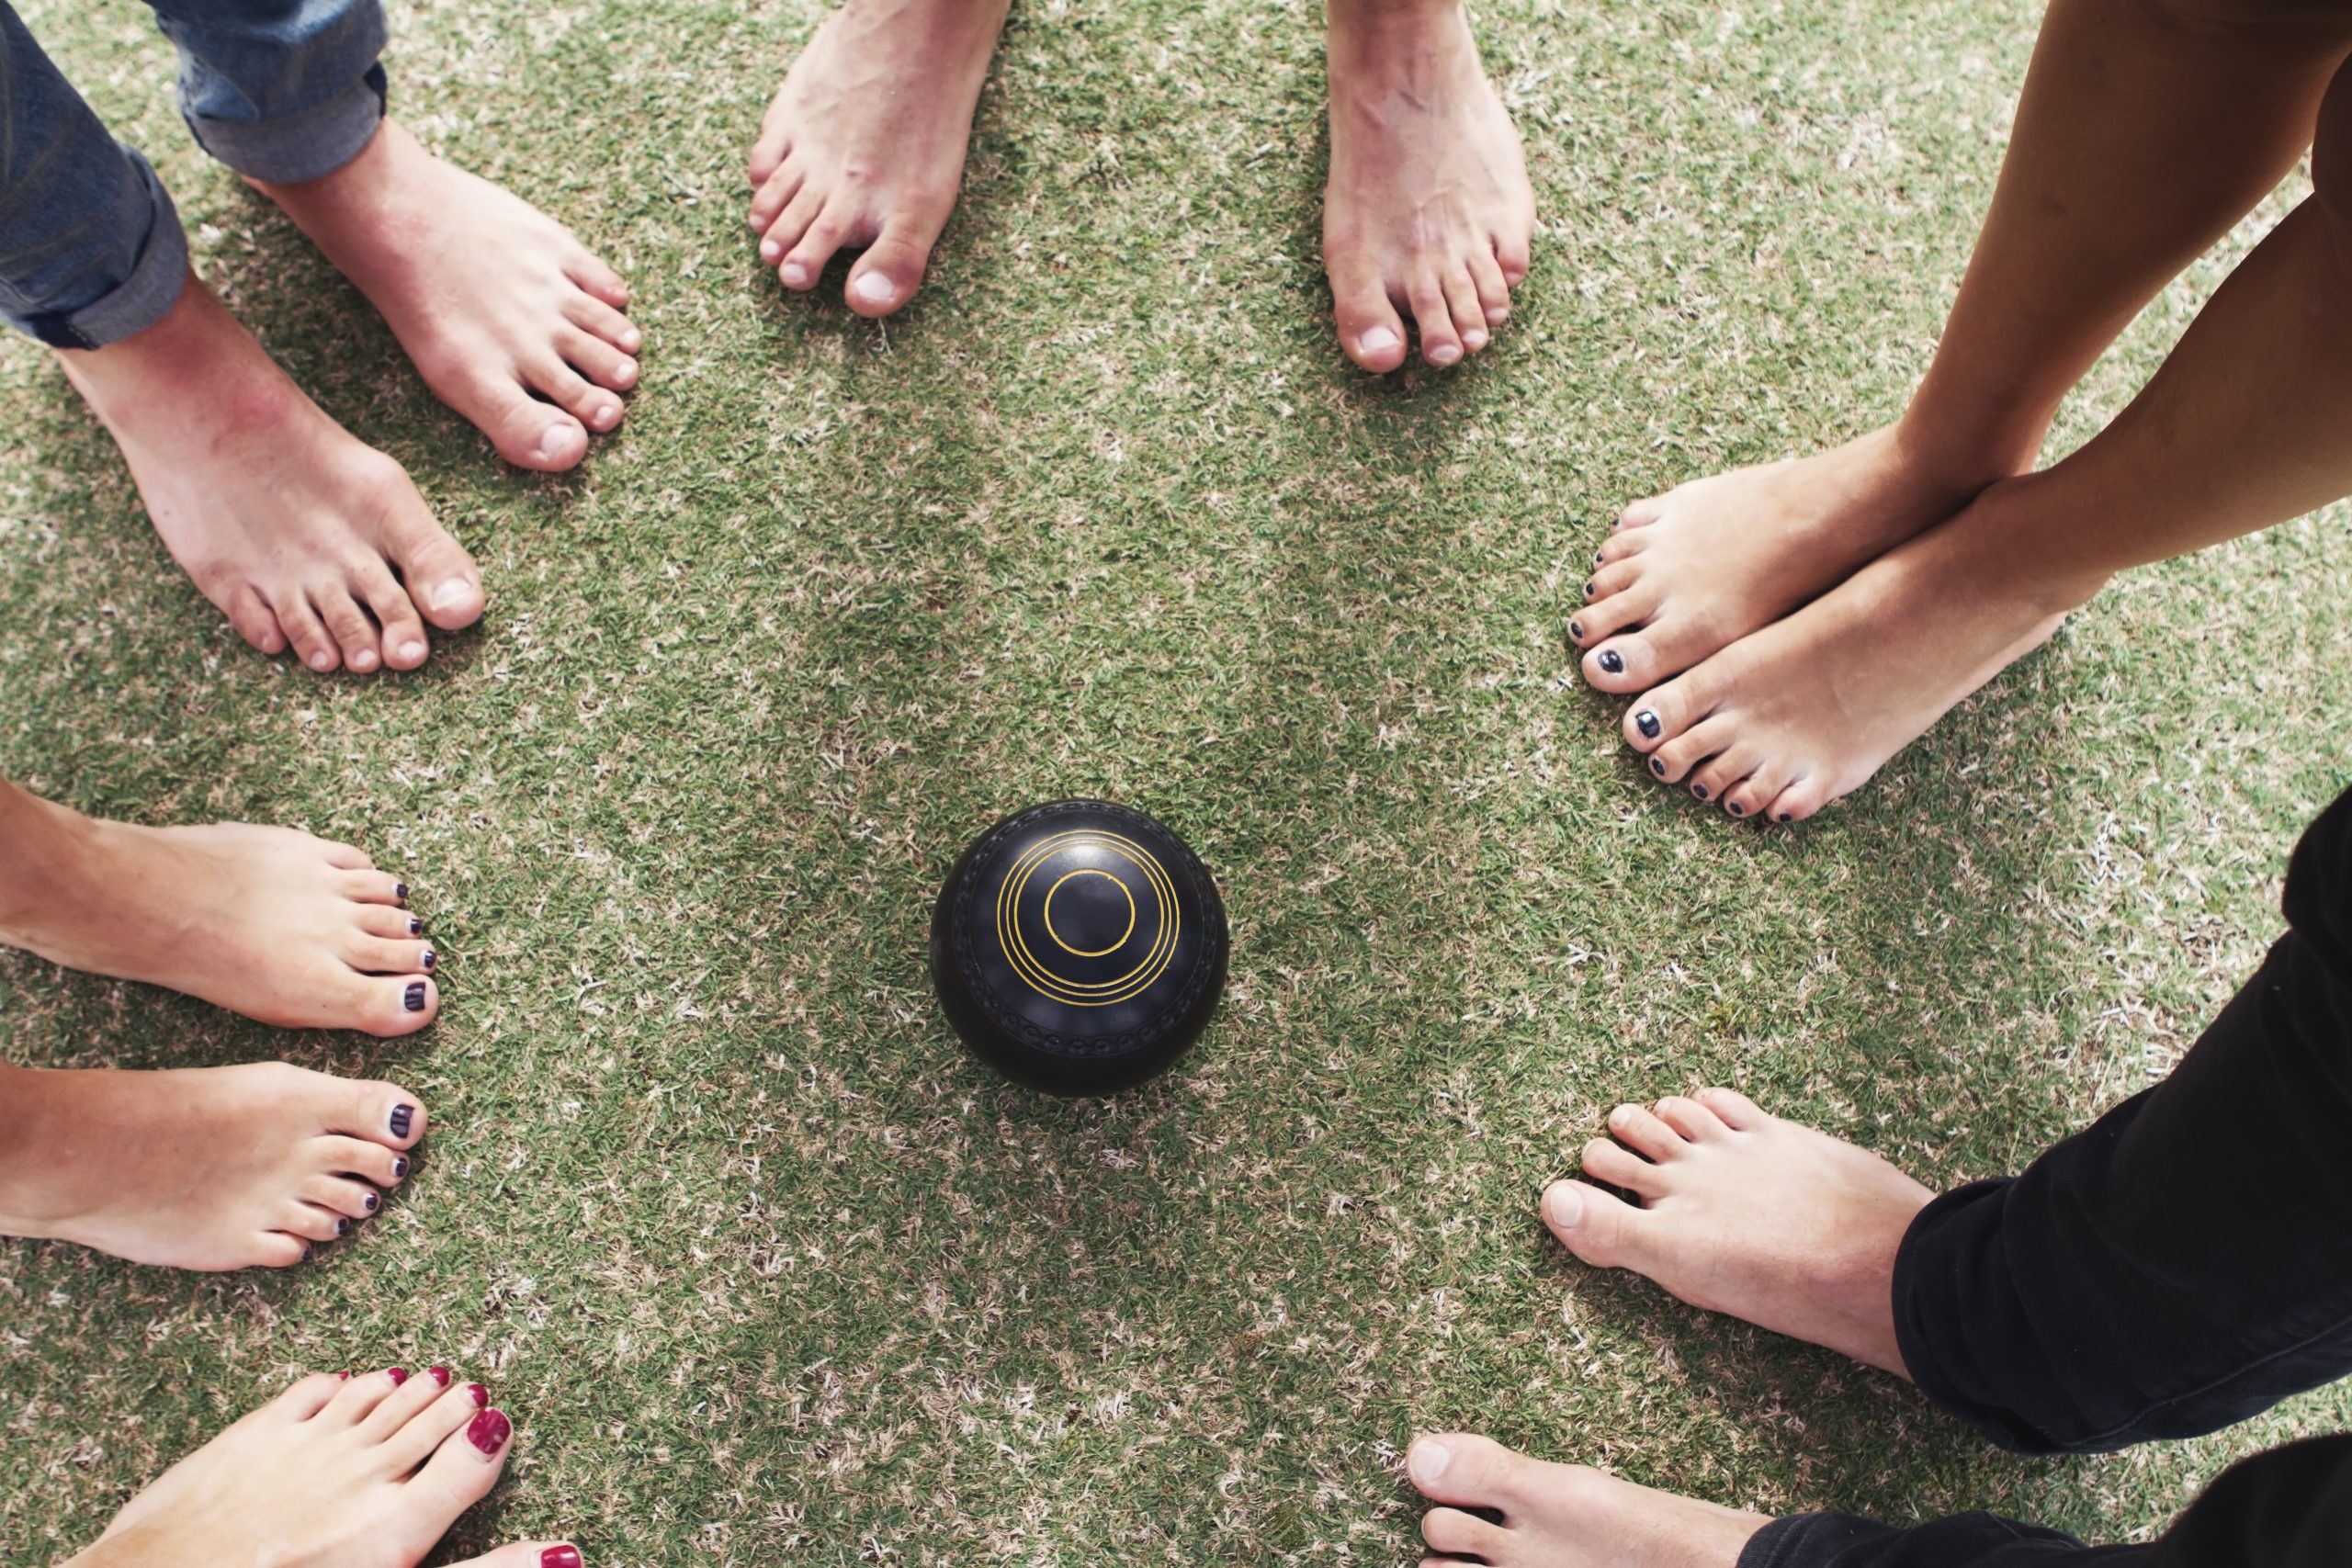 Overhead view of bare feet friends on grass around lawn bowls